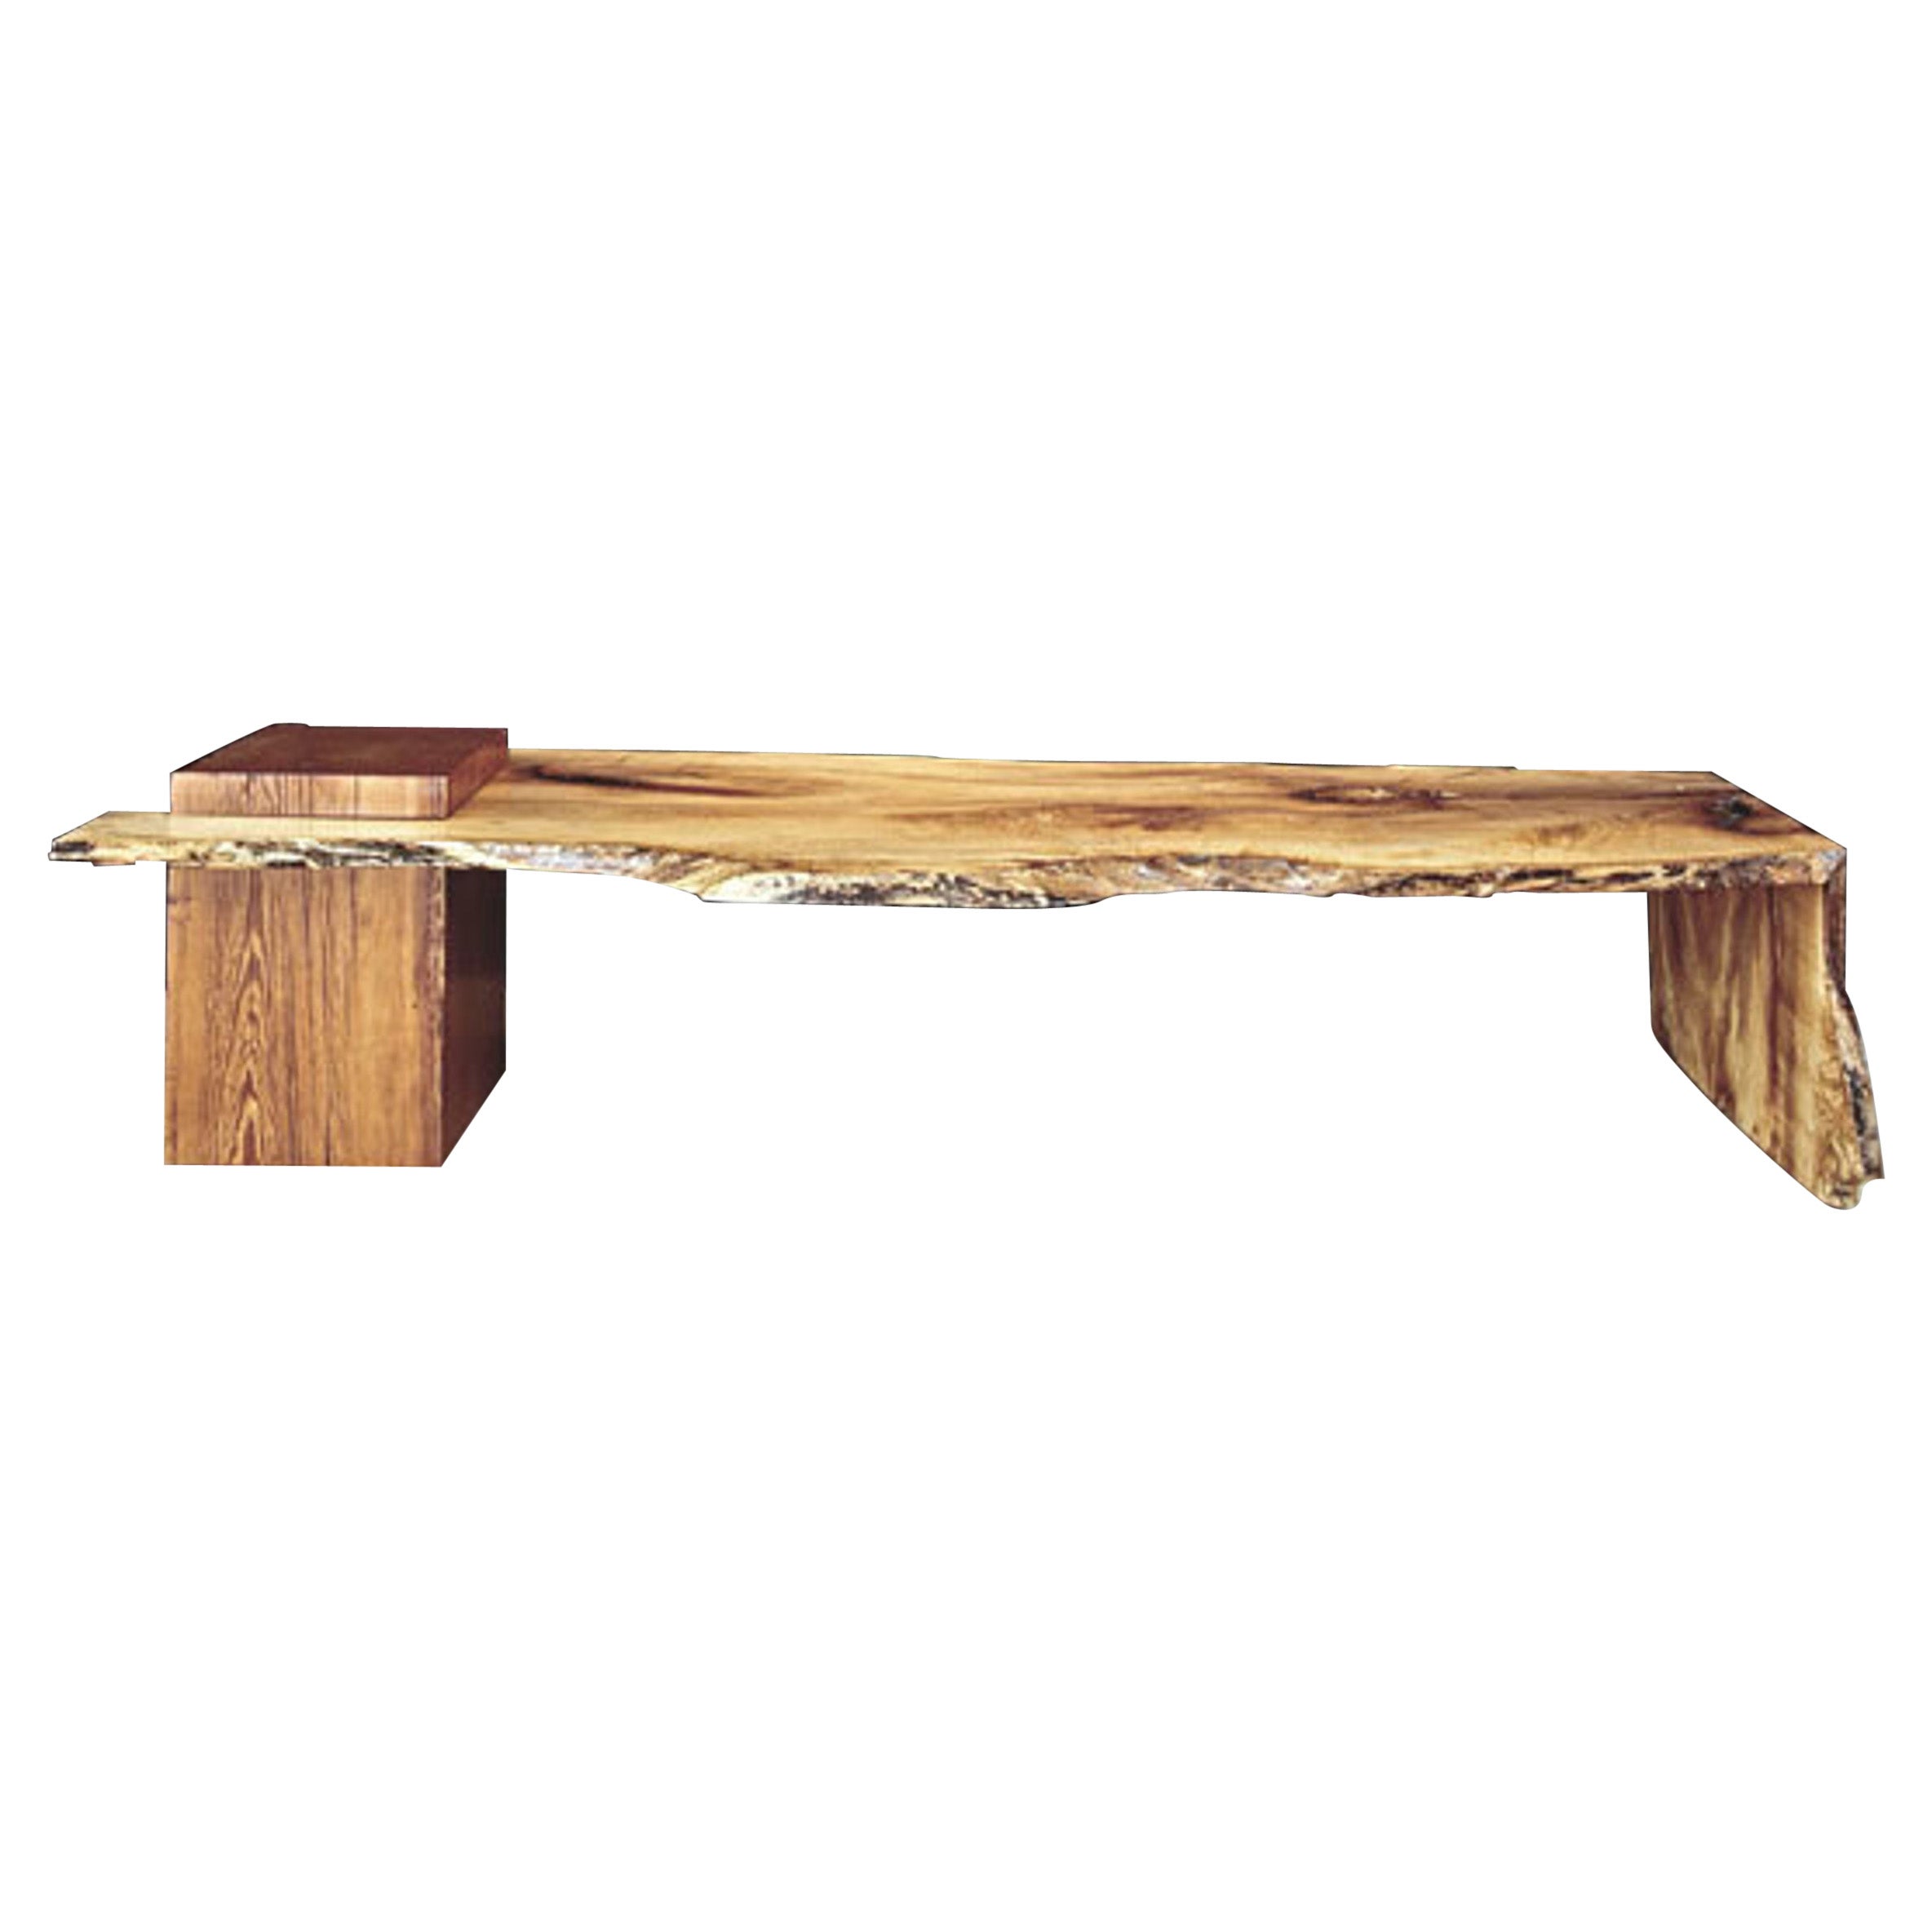 Organic Live Edge 1-Fold Maple Low Table / Bench with Heart Growth Pine Leg For Sale